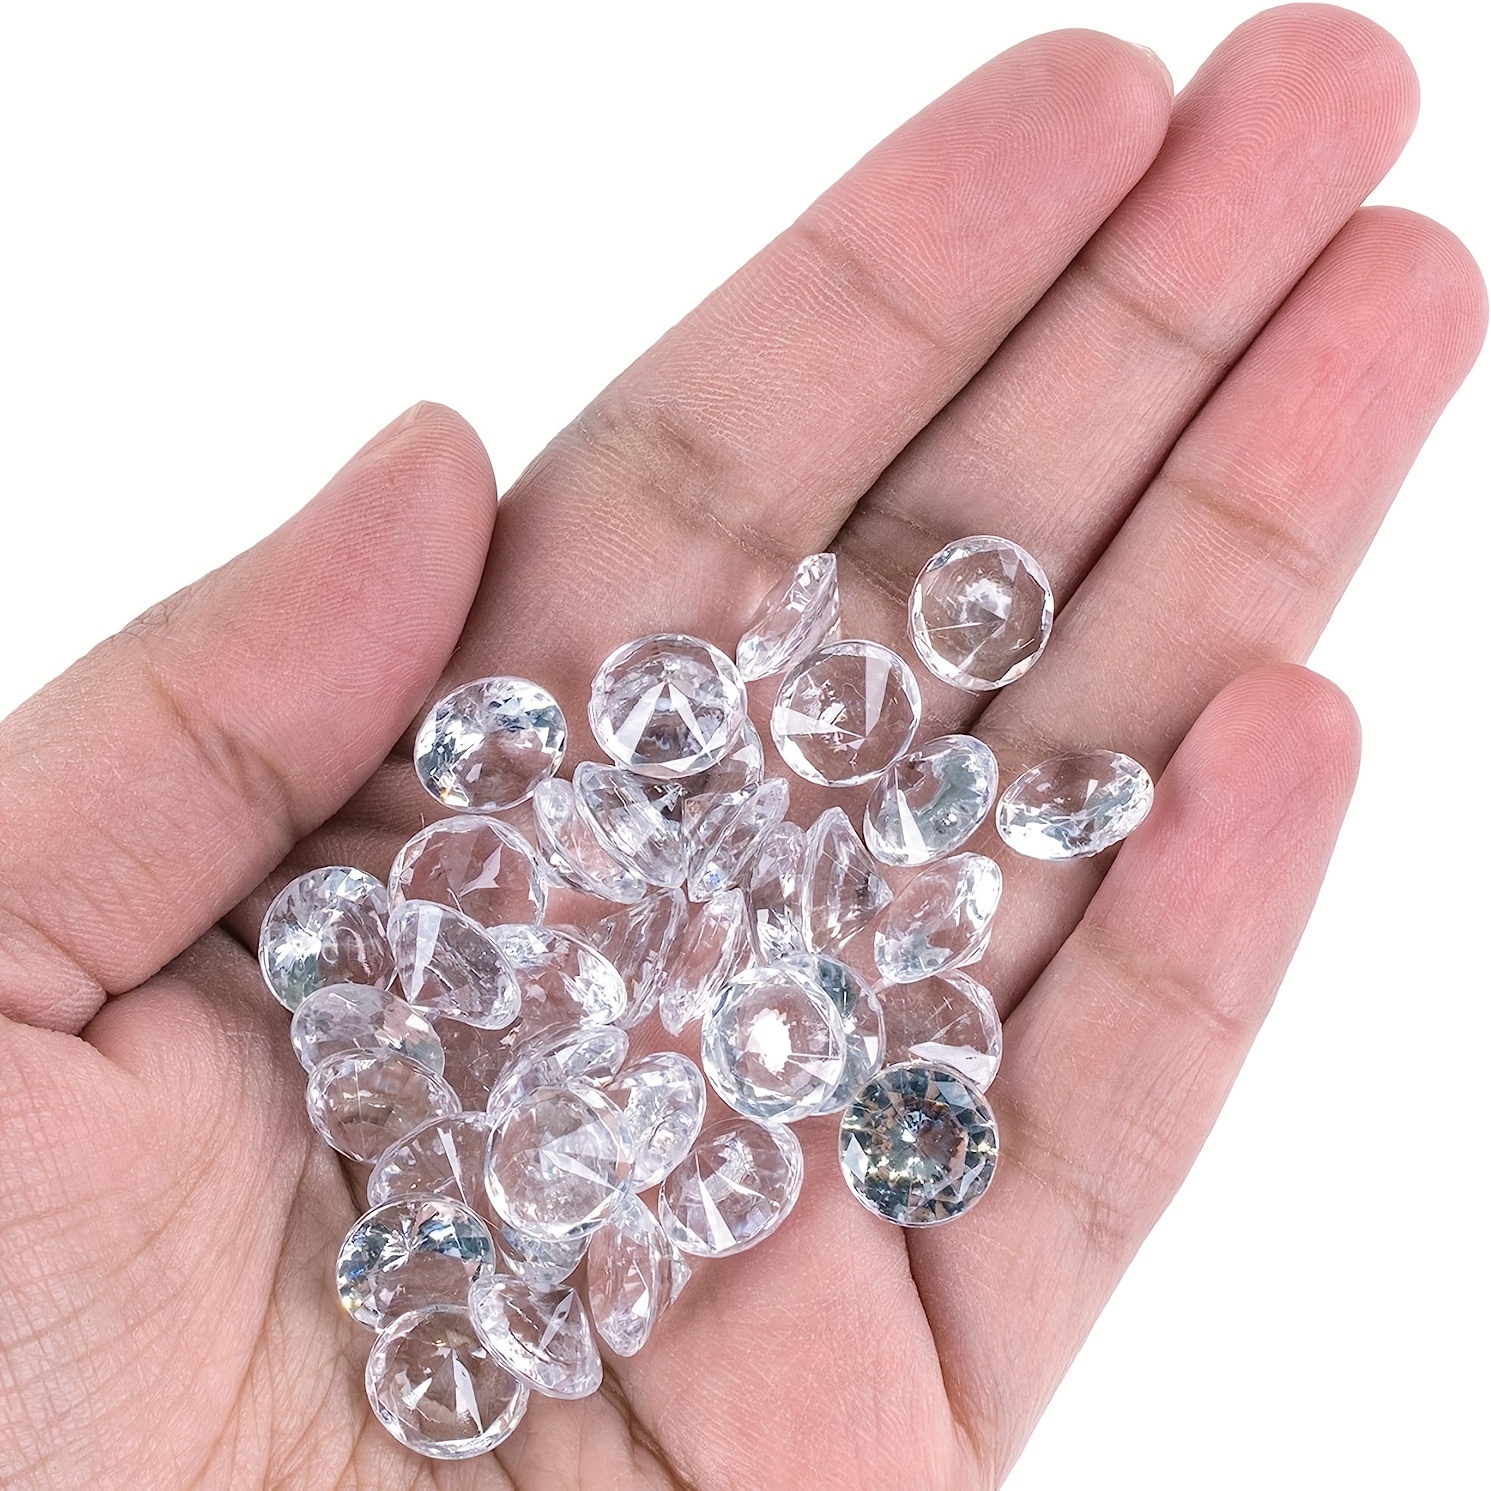 Clear Artificial Diamonds Crystals Acrylic Gems Wedding Table Scattering  Gemstones Christmas Party Decorations Bridal Shower Vase Fillers - Temu  Germany